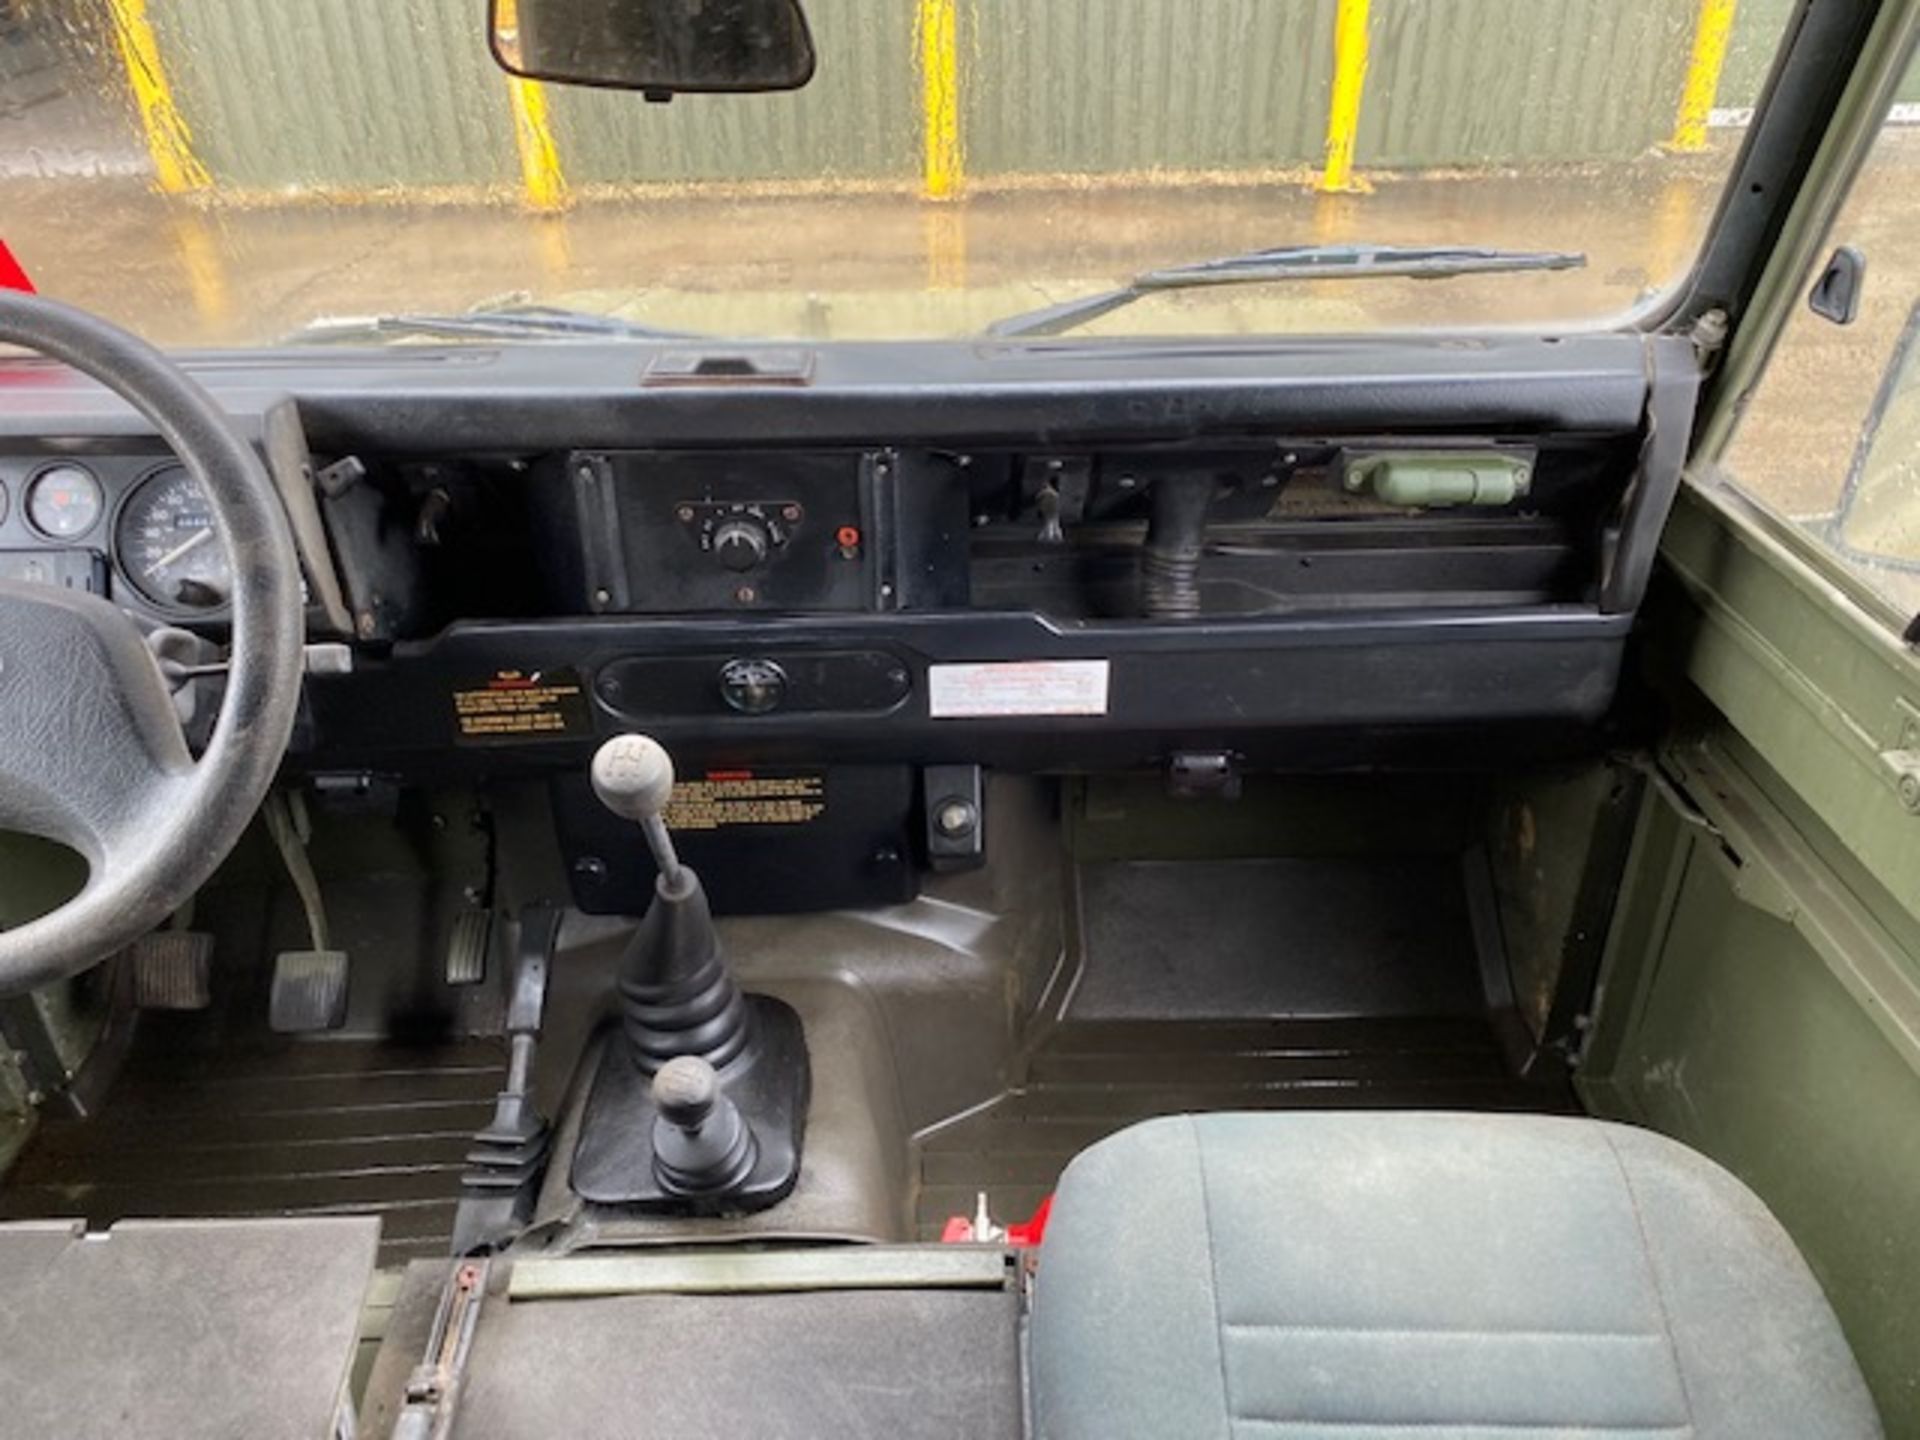 1995 Left Hand Drive Land Rover 110 Tithonus hardtop ONLY 66,824 km - Image 22 of 47